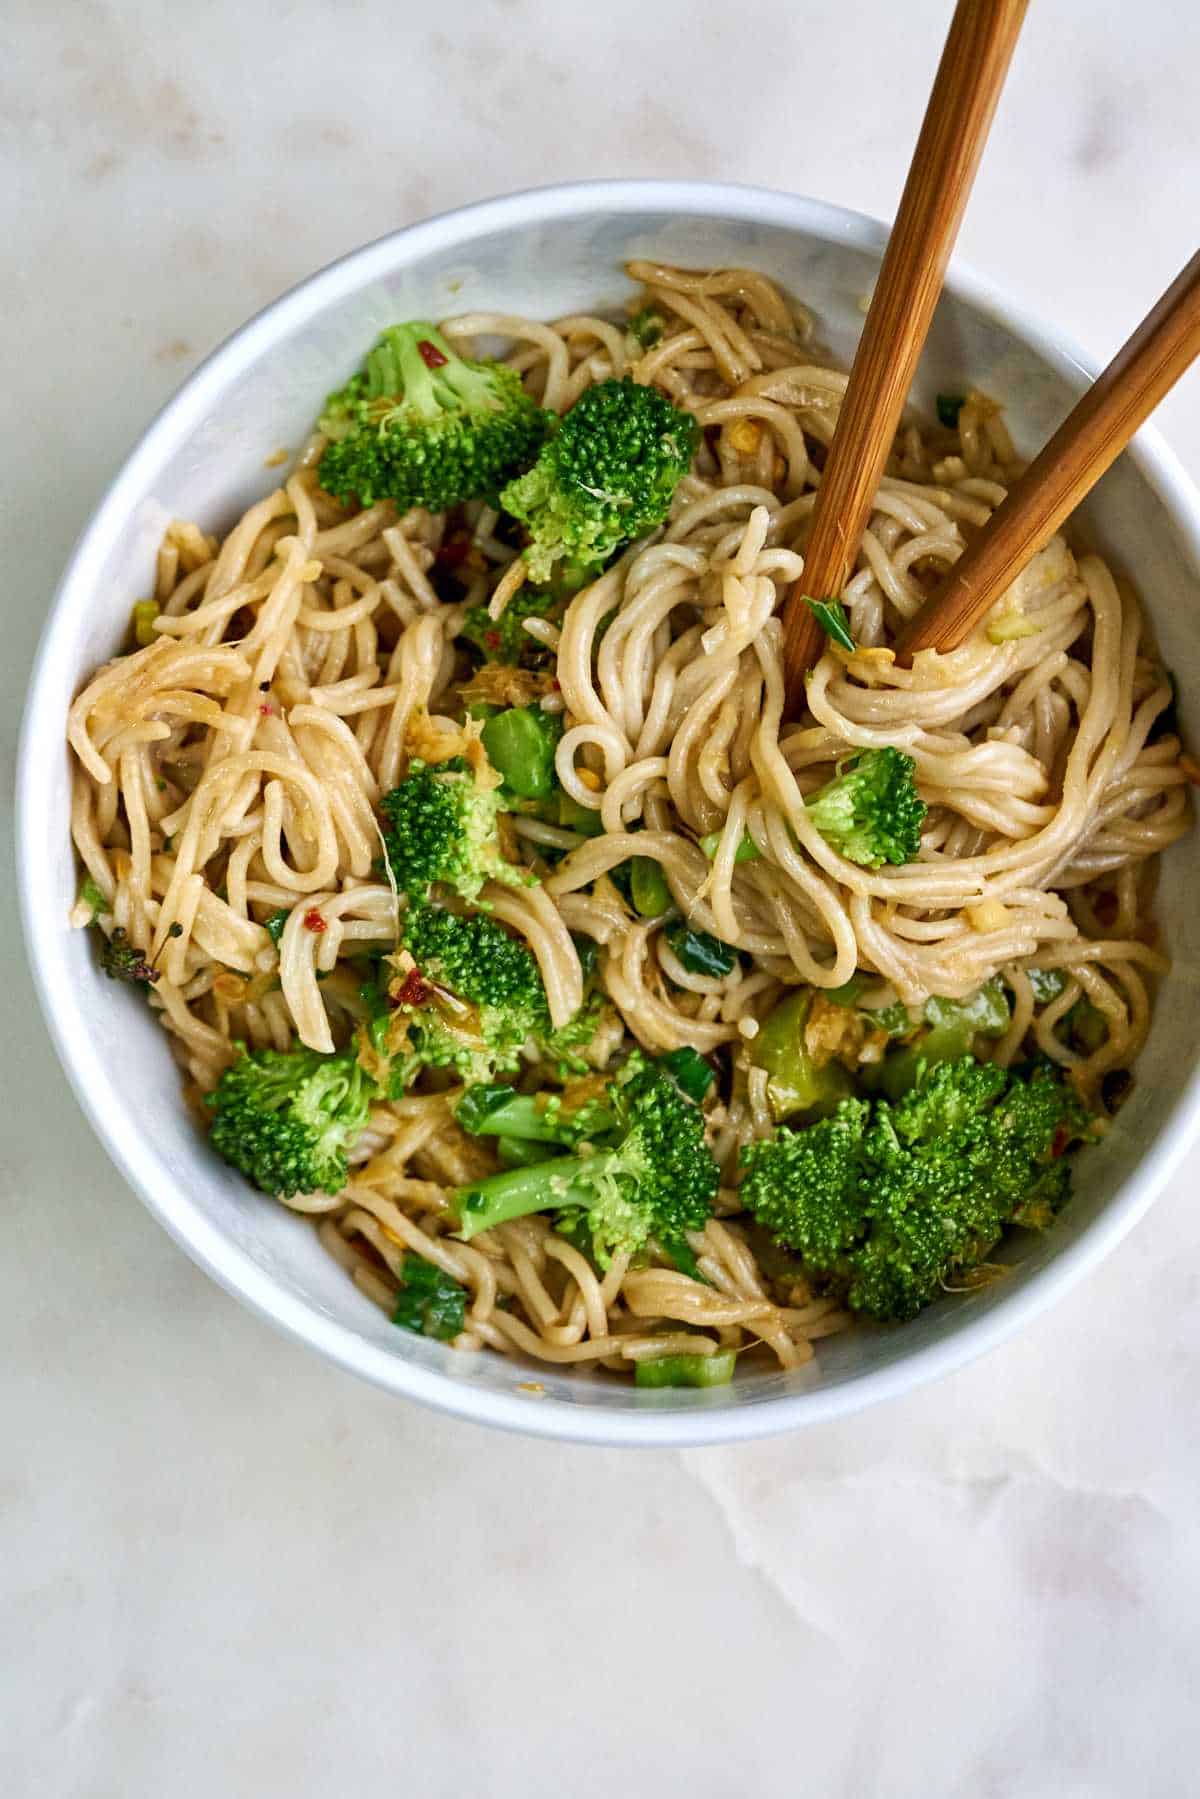 Ginger Scallion Noodle Stir Fry with Broccoli | Vegan | Proportional Plate